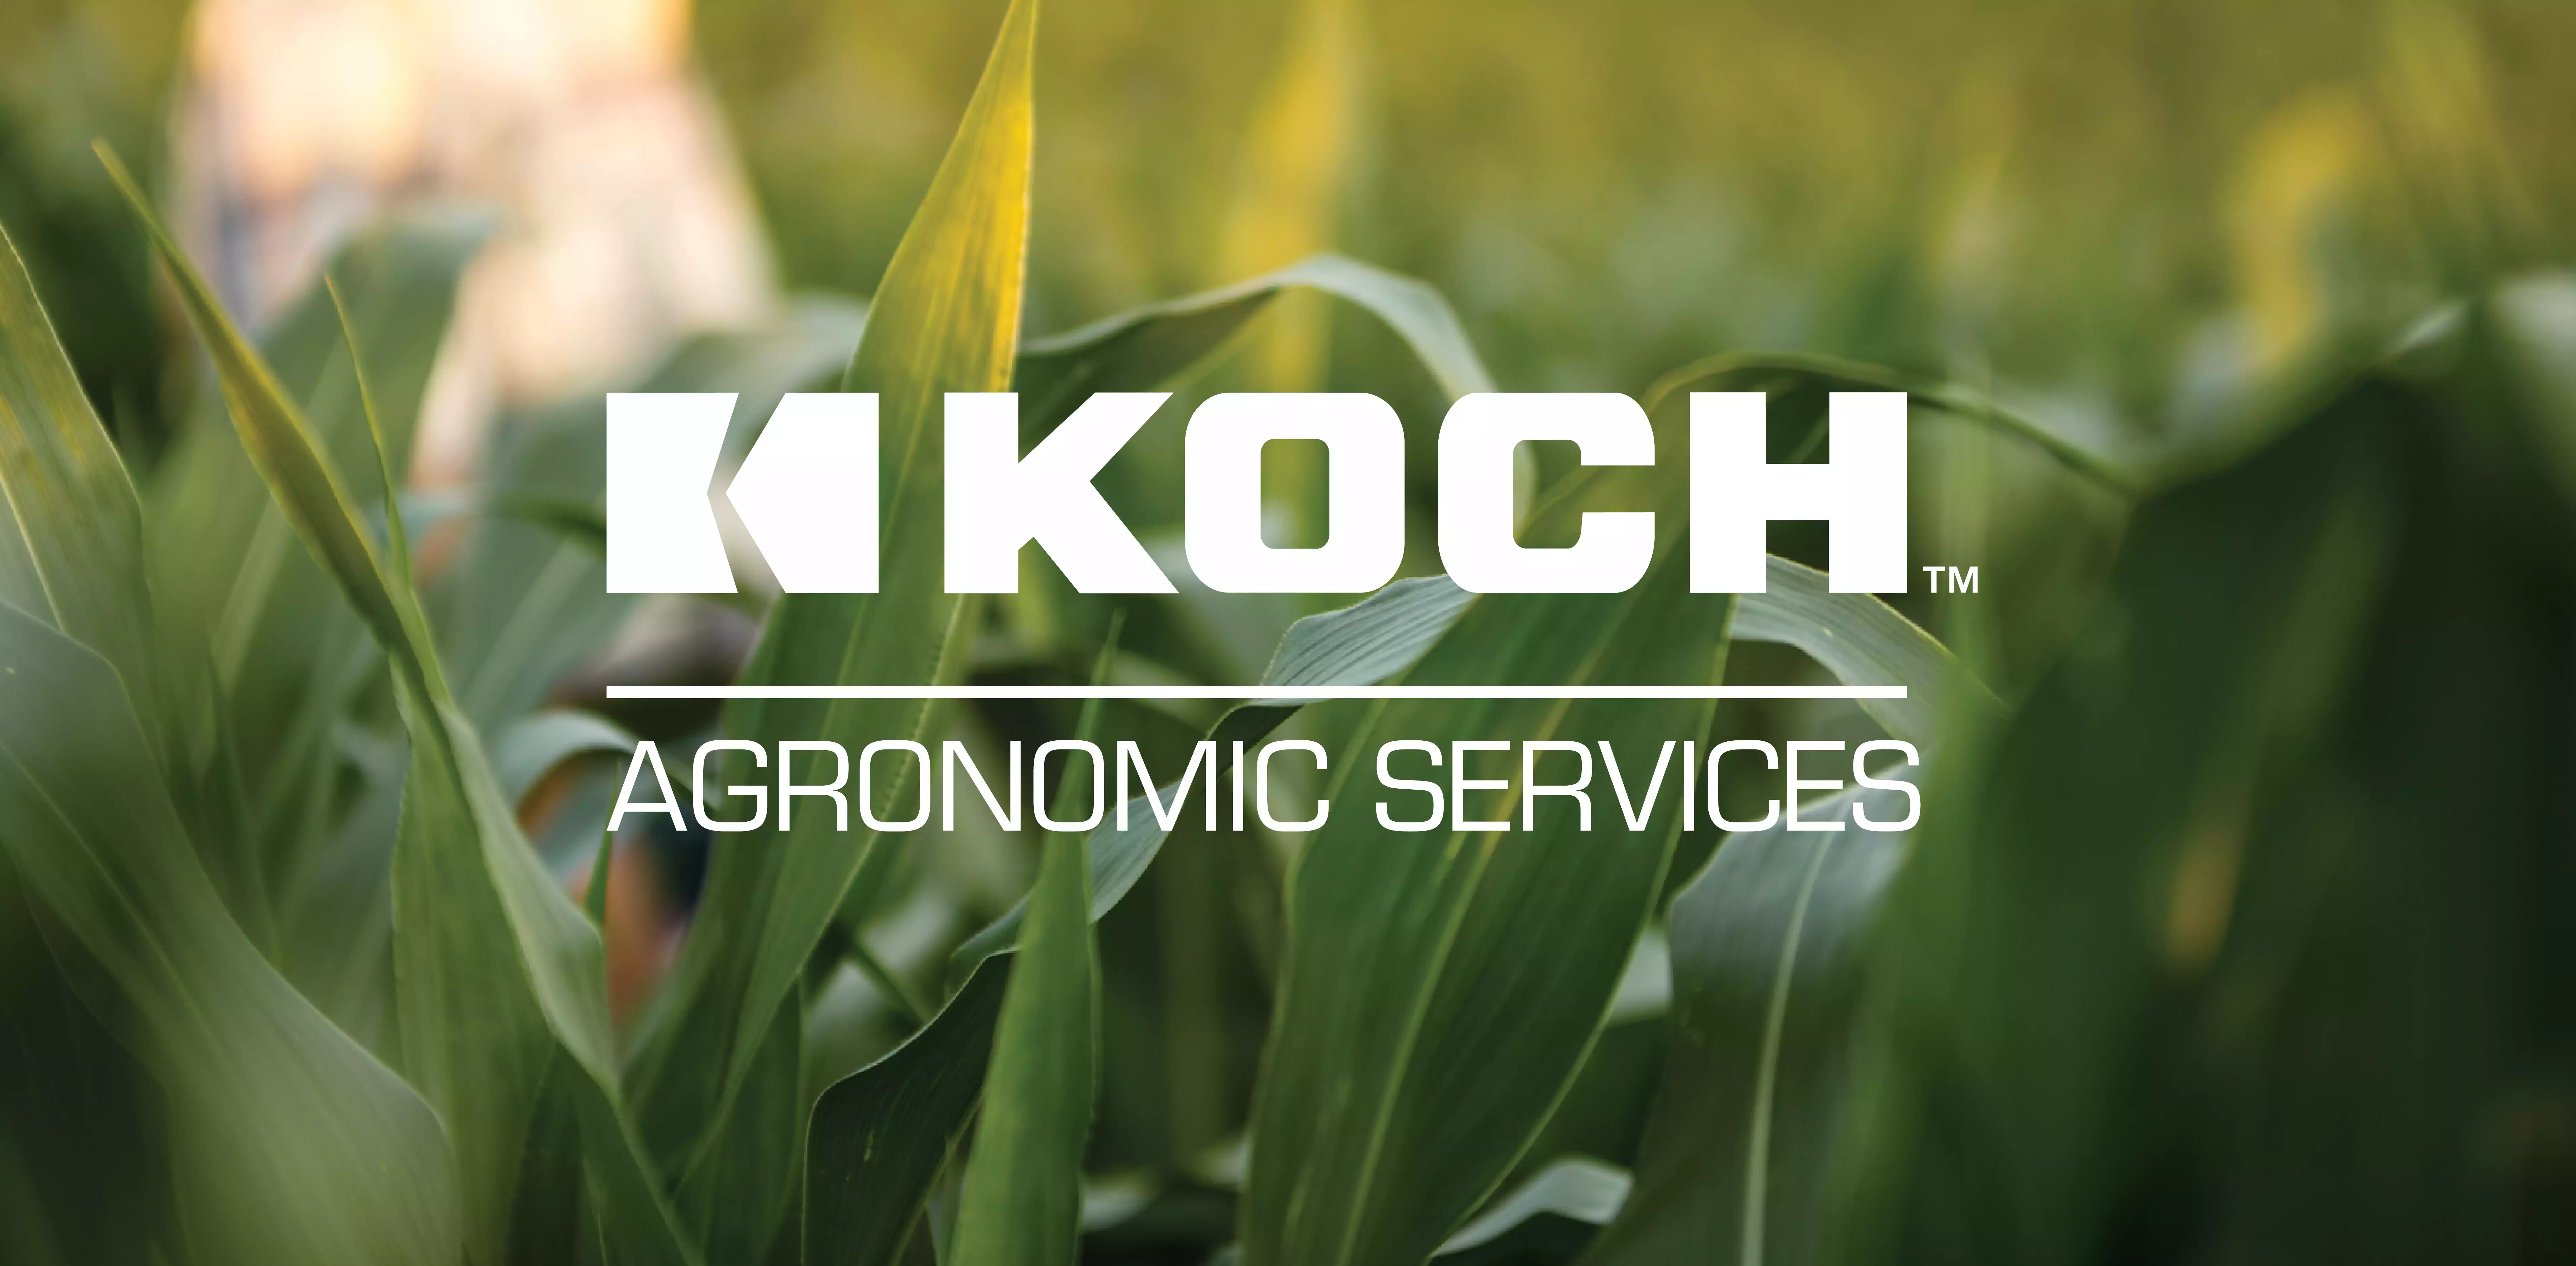 Koch Agronomic Services